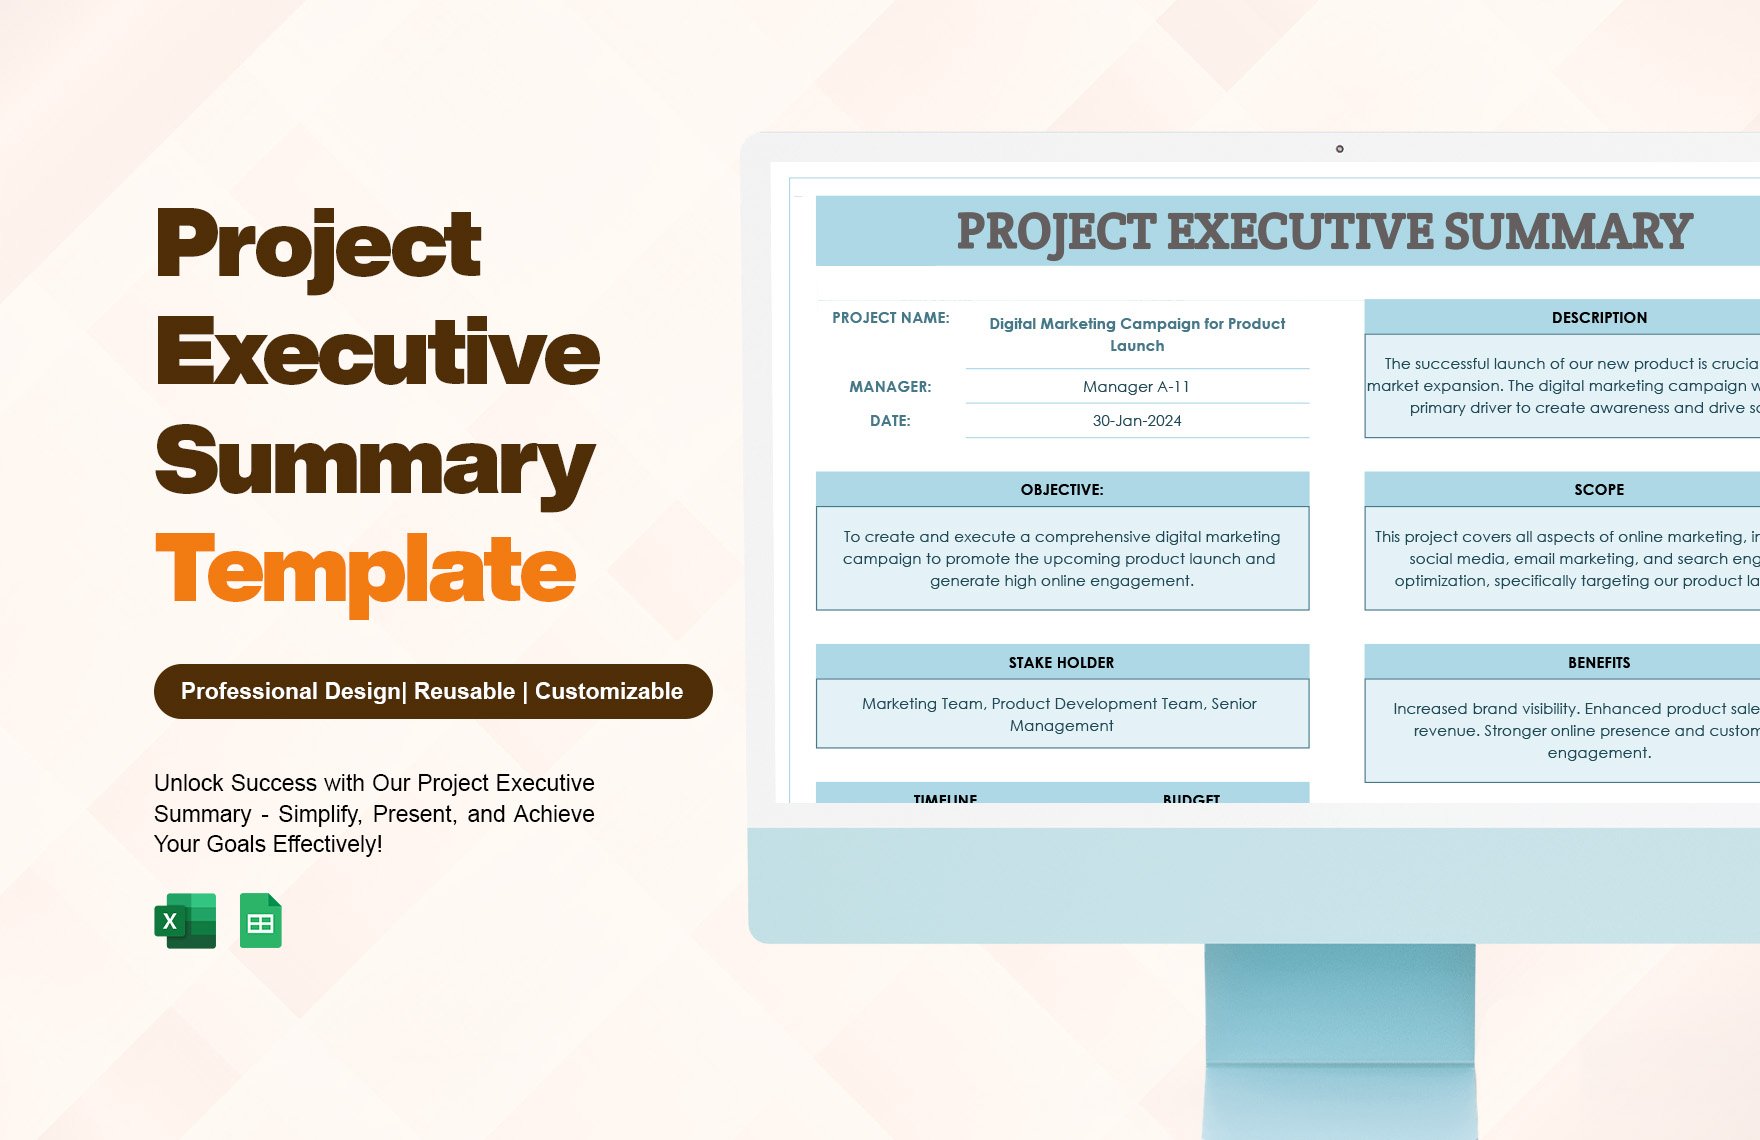 Project Executive Summary Template in Excel, Google Sheets